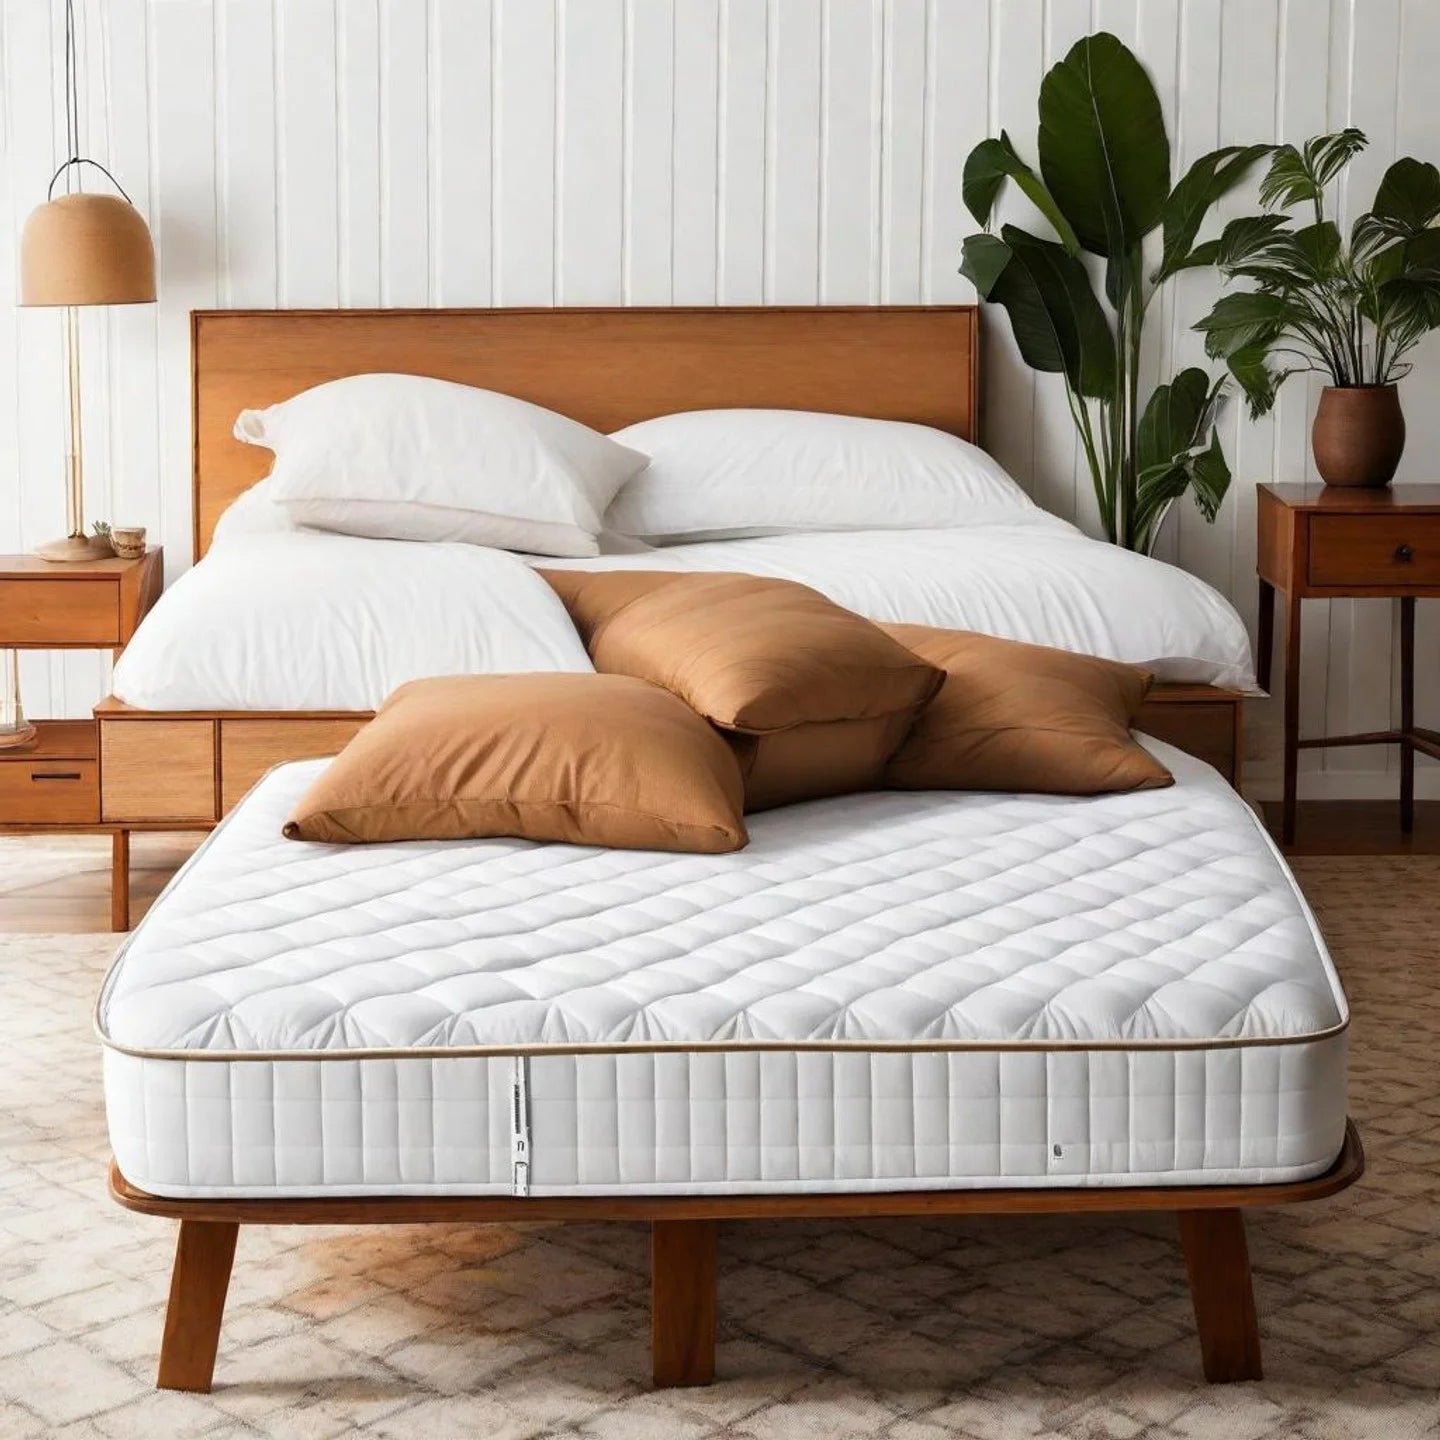 Are Box Mattresses Actually Good? Experts Explain Why They’re So Cheap